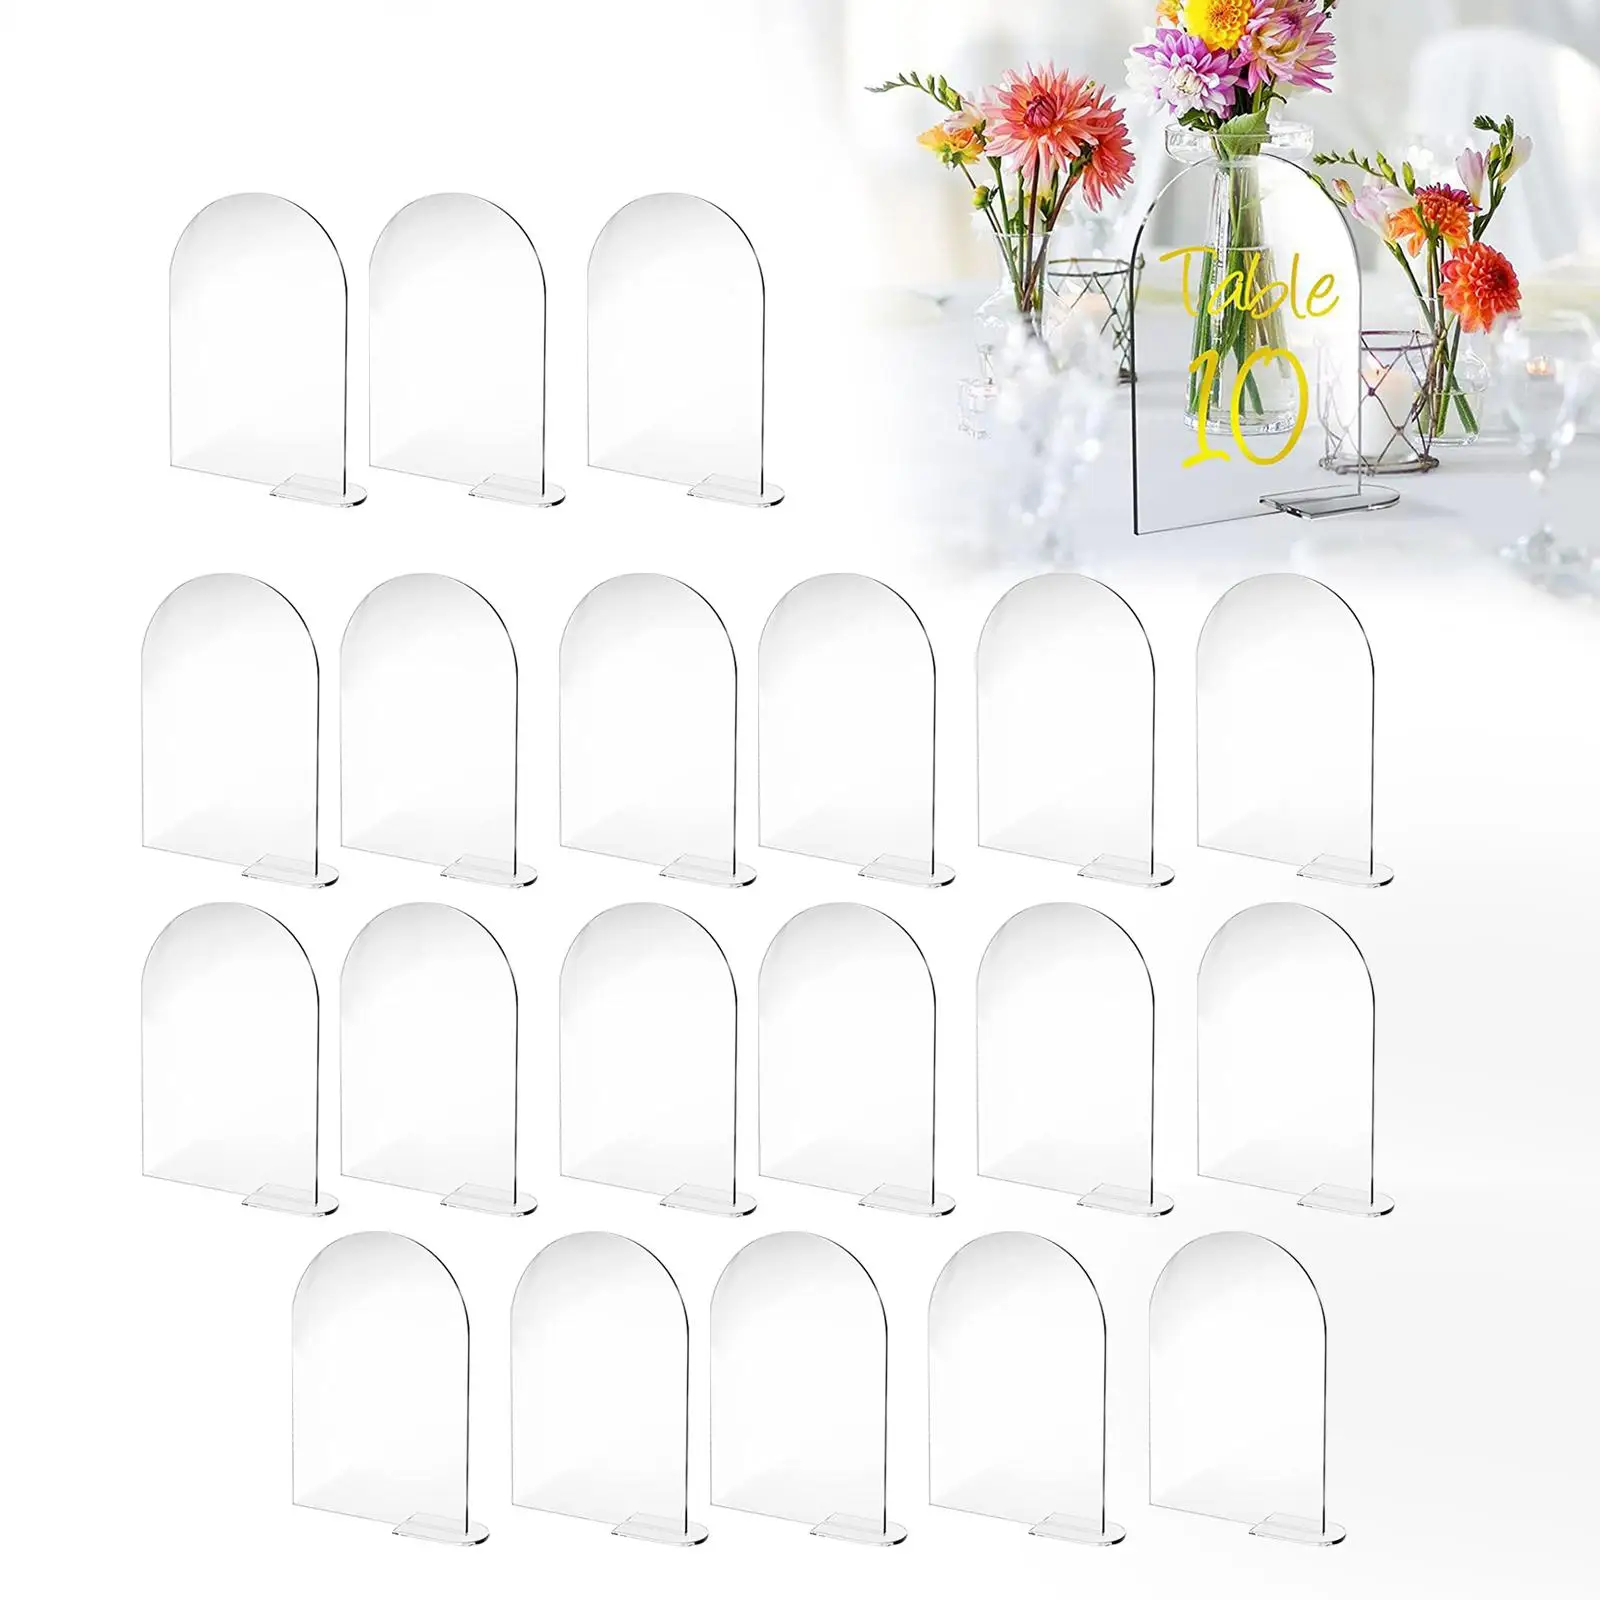 20x Acrylic Place Cards Hand Written Display with Stand Sublimation DIY Blank Table Numbers Menu Signs for Reception Restaurant